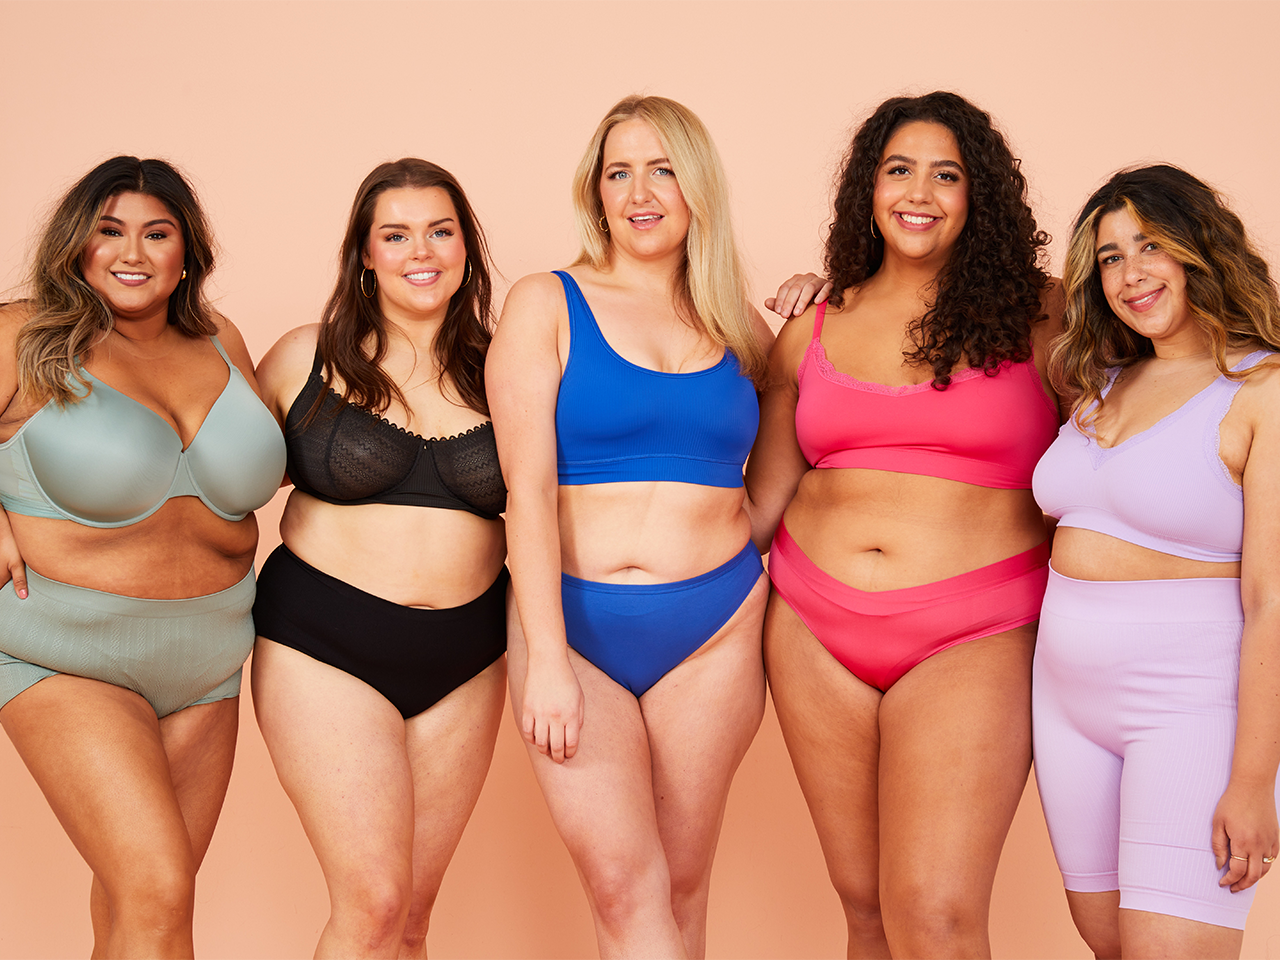 Arula Intimates will feature over 130 styles of bras, bralettes, undies and loungewear, with an updated look and feel from what is currently available for the mid- and plus-size consumer.